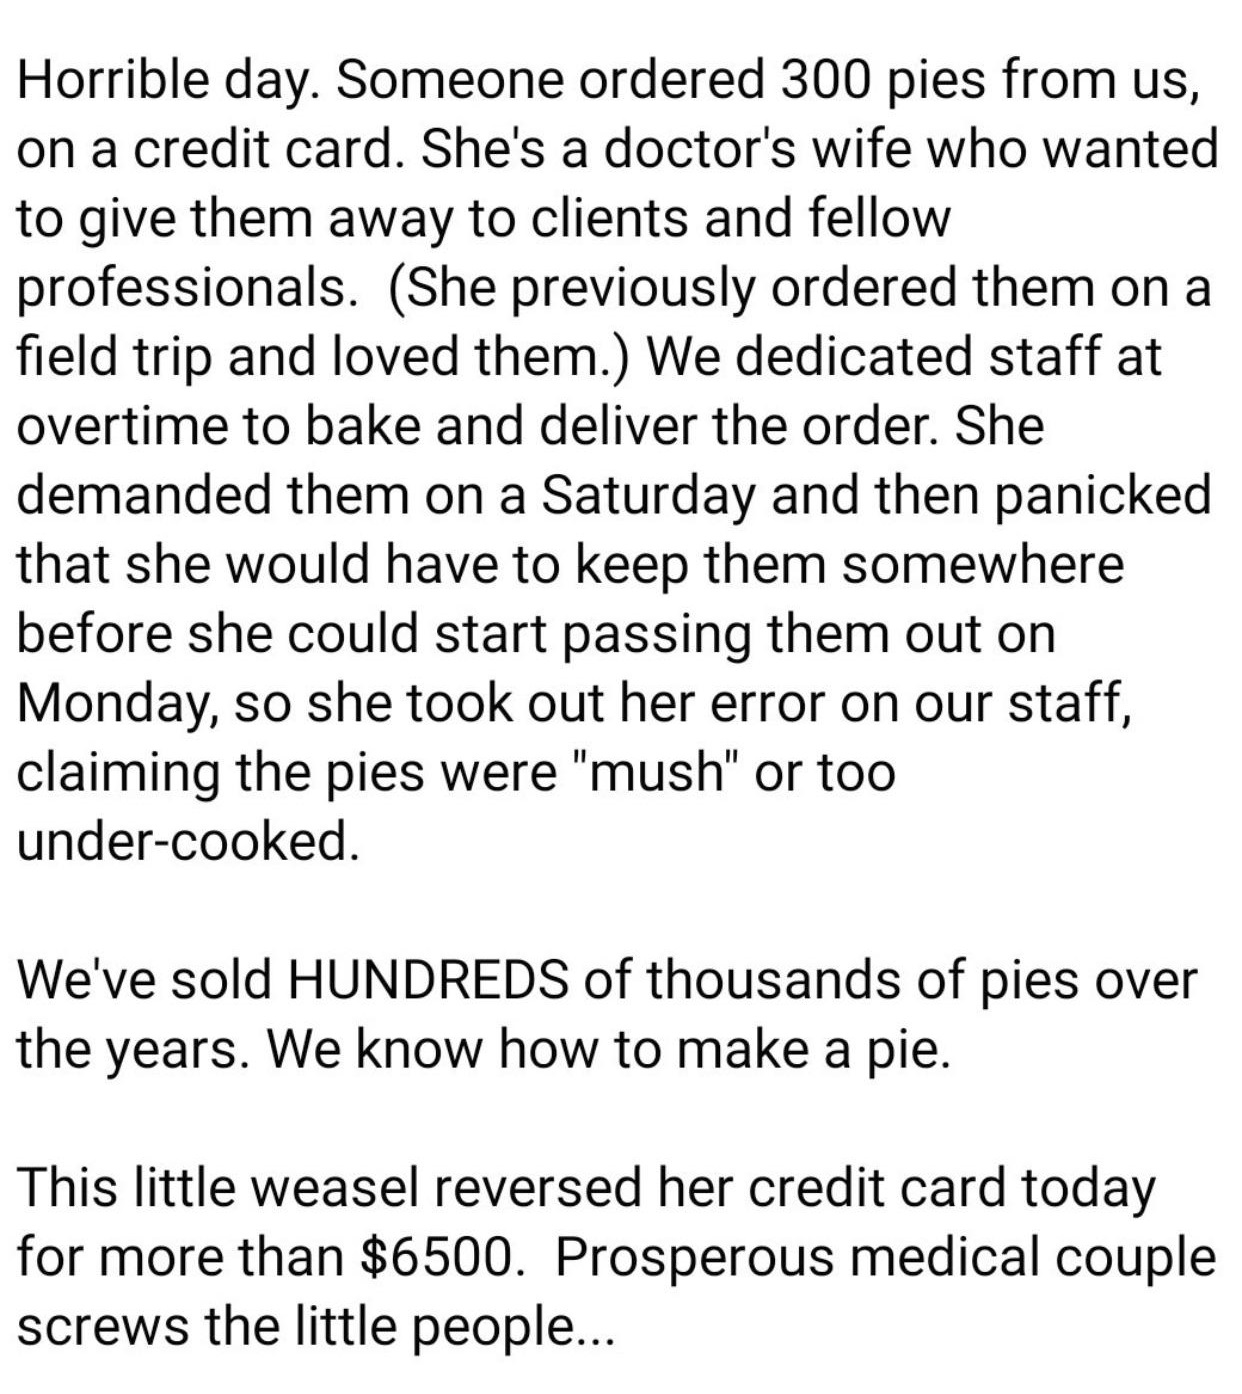 document - Horrible day. Someone ordered 300 pies from us, on a credit card. She's a doctor's wife who wanted to give them away to clients and fellow professionals. She previously ordered them on a field trip and loved them. We dedicated staff at overtime